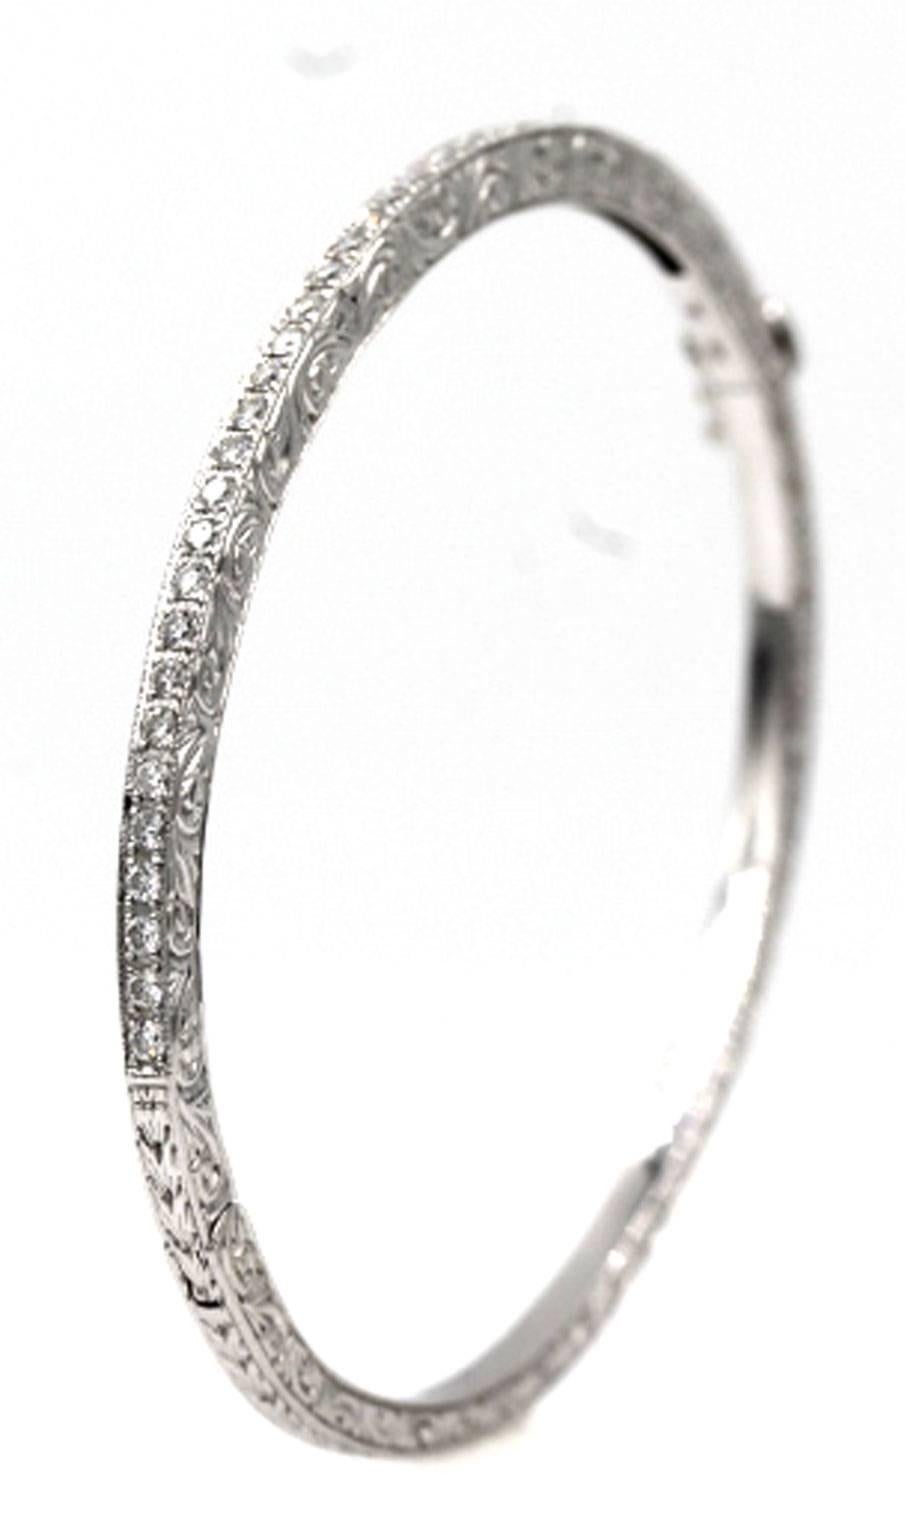 This stylish diamond bangle bracelet from designer Penny Preville can be worn with anything. The diamond bangle has beautiful etchings around each side, and has a diamond weight of approximately 1/3 carat. The bangle measures 7 inches, has a safety